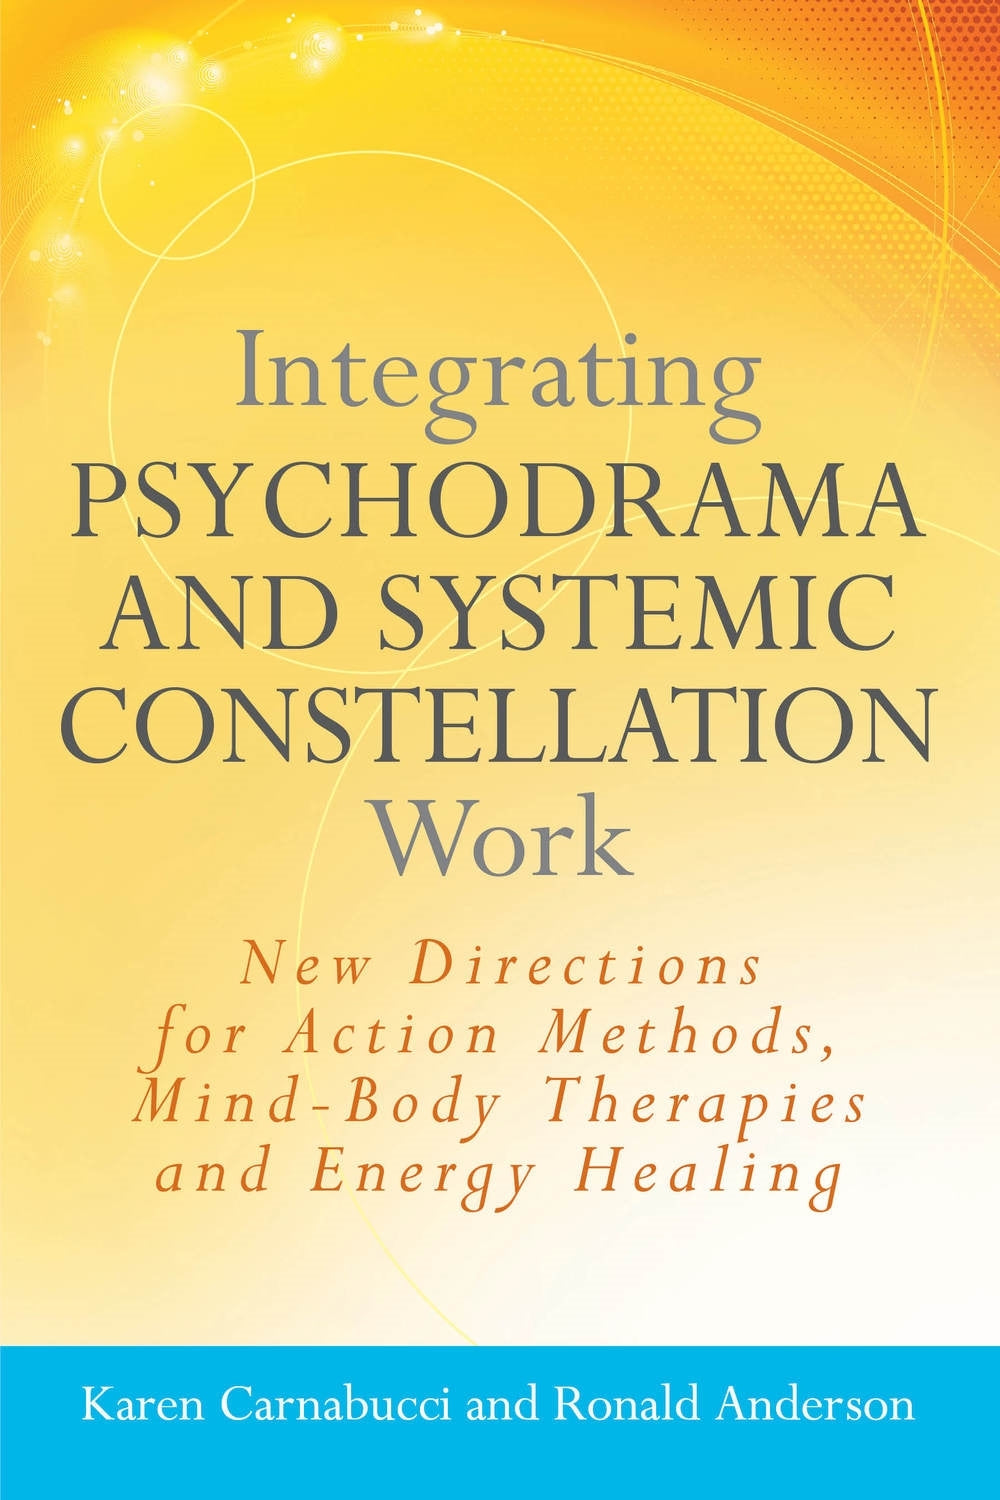 Integrating Psychodrama and Systemic Constellation Work by Ronald Anderson, Karen Carnabucci